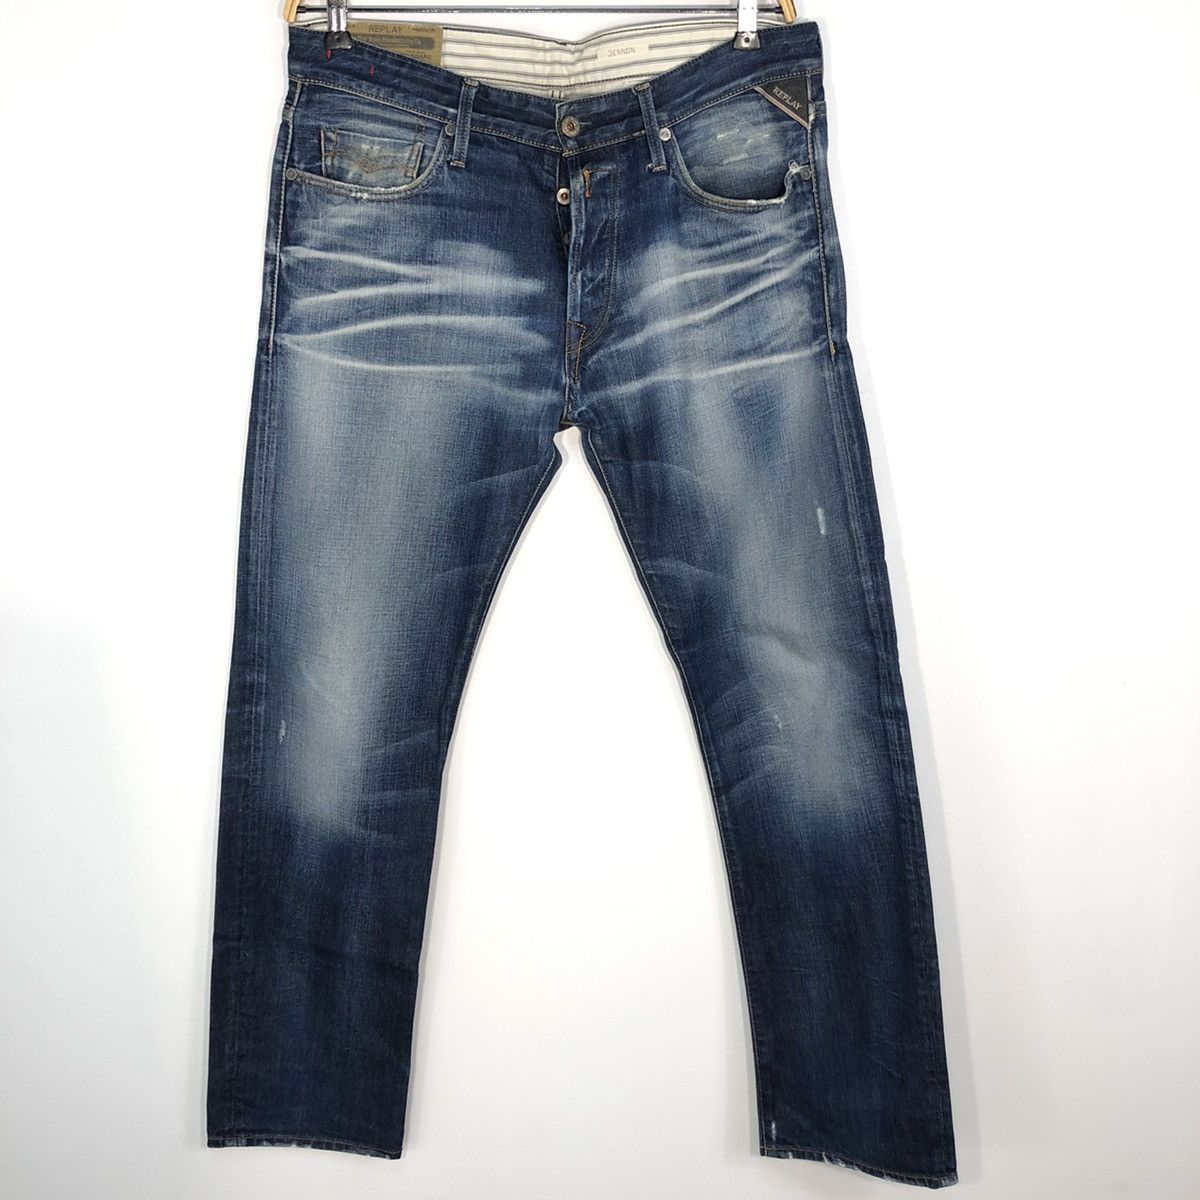 Replay Replay Jennon Light Blue Faded Claw Mark Slim Fit Jeans | Grailed